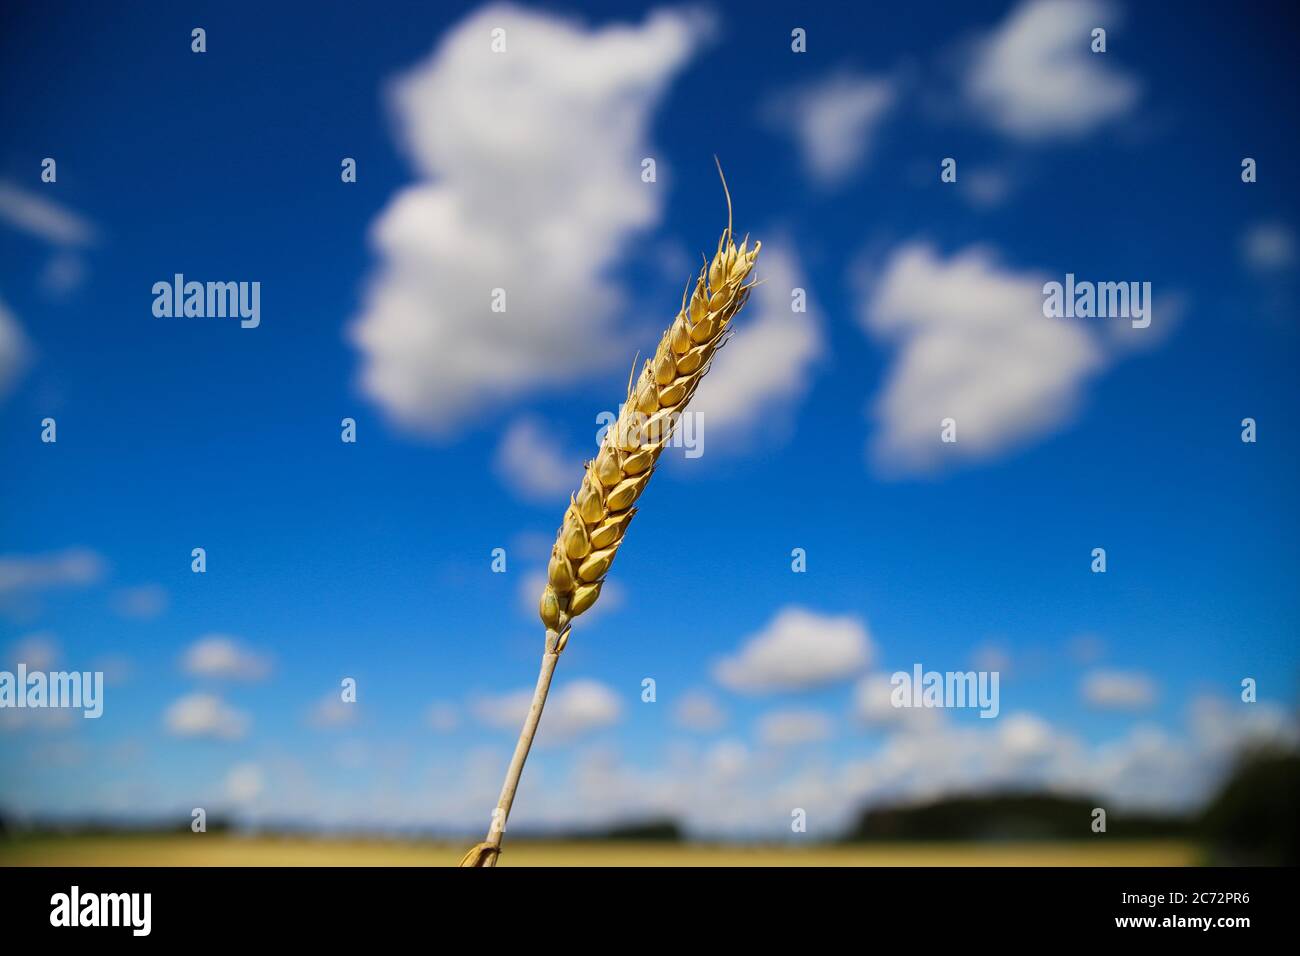 View on isolated ripe wheat ear against blue sky with cumulus clouds and blurred rual field (focus on wheat head) Stock Photo